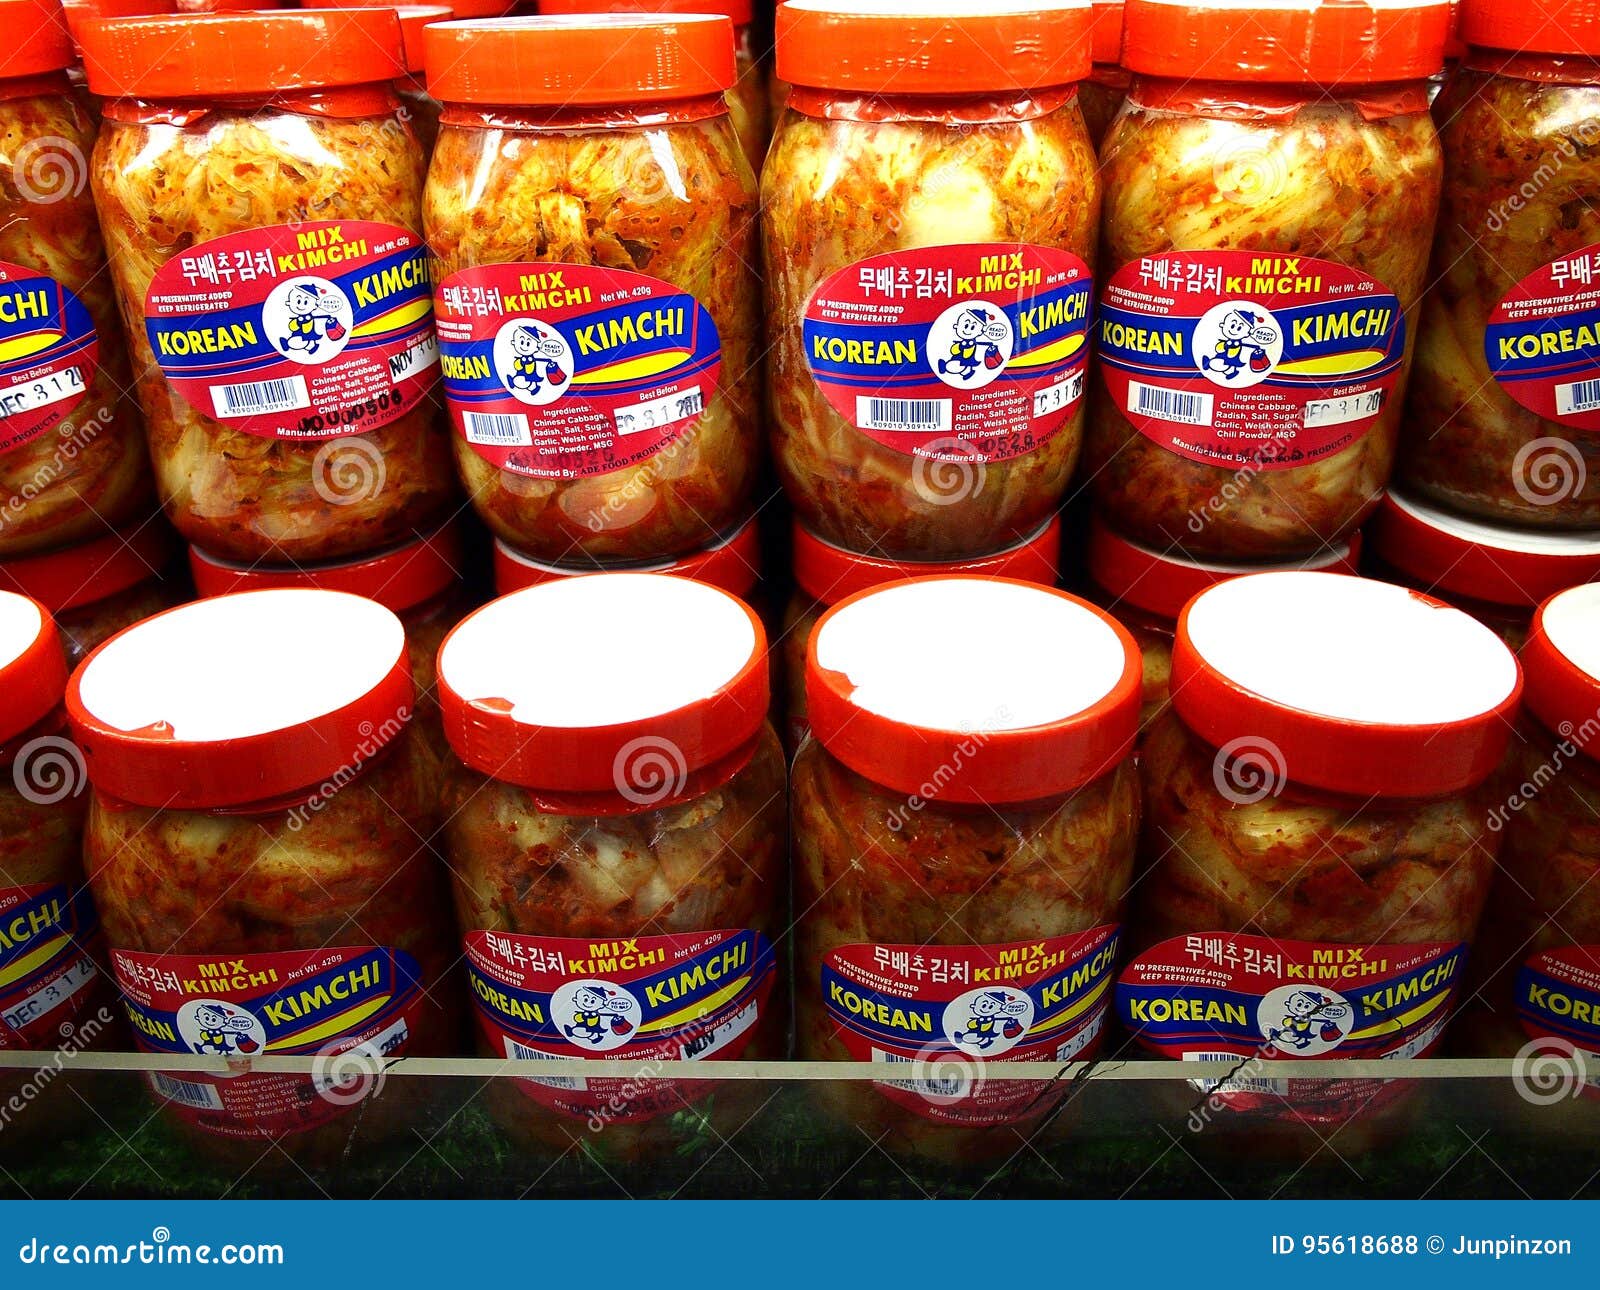 Where is Kimchi in Grocery Store? 